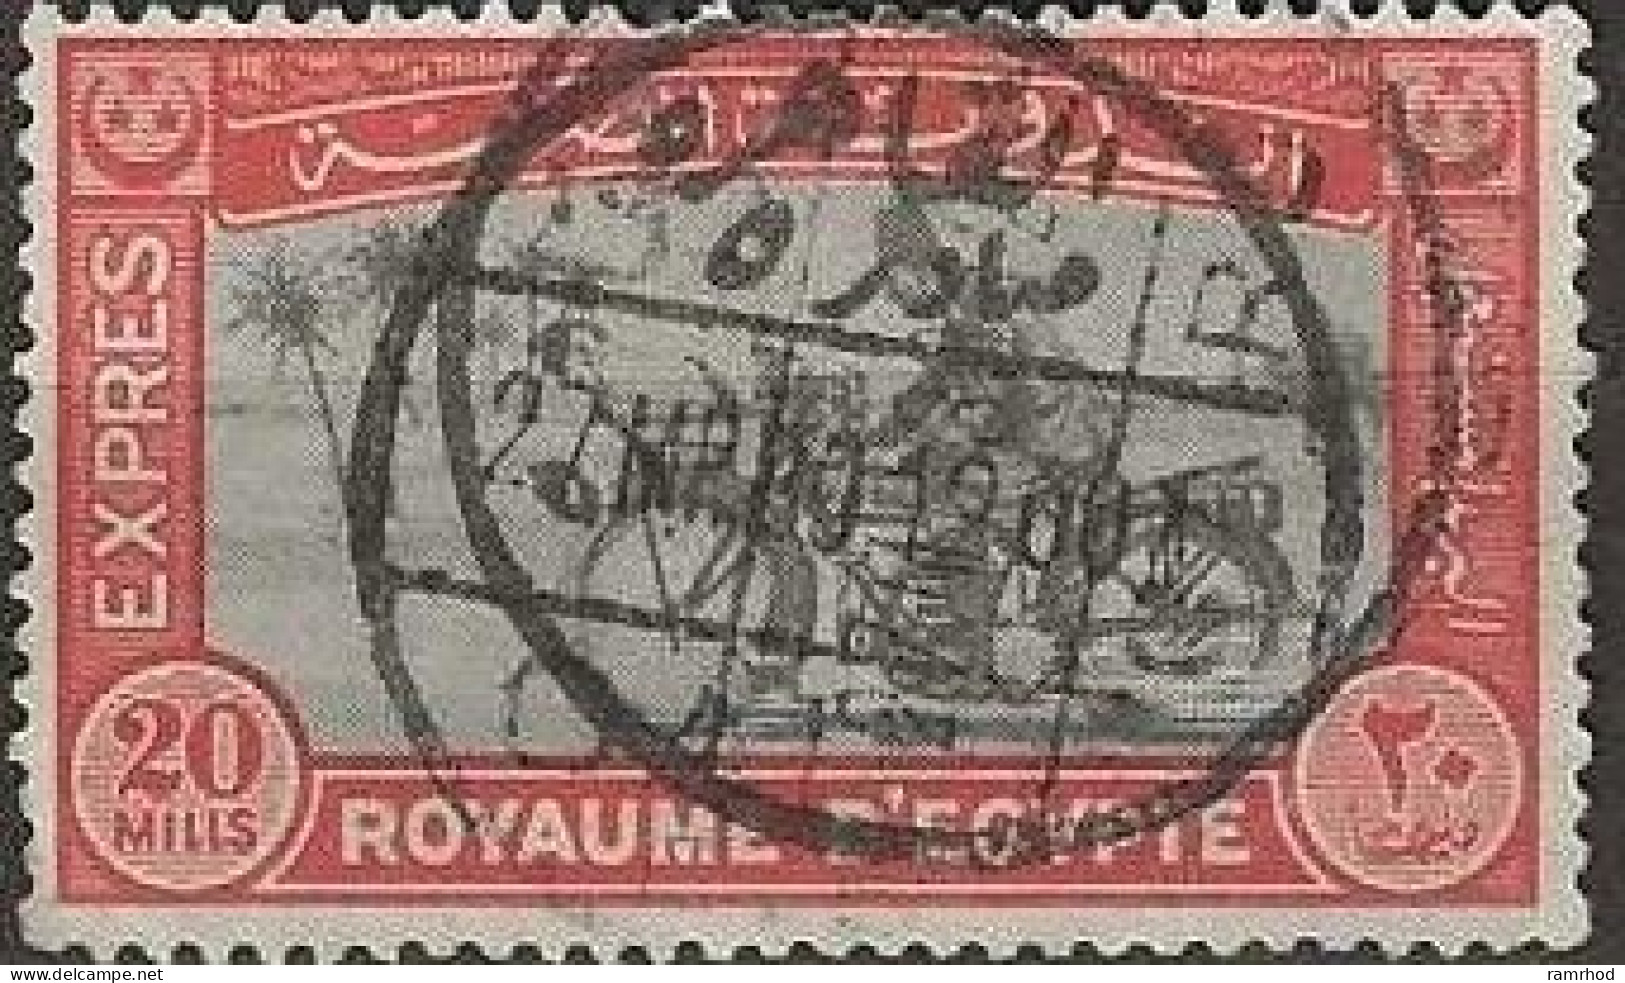 EGYPT1926 Express Letter Stamp - Postman On Motorcycle - 10m - Refugee Mother And Child, And Map FU - Servizio